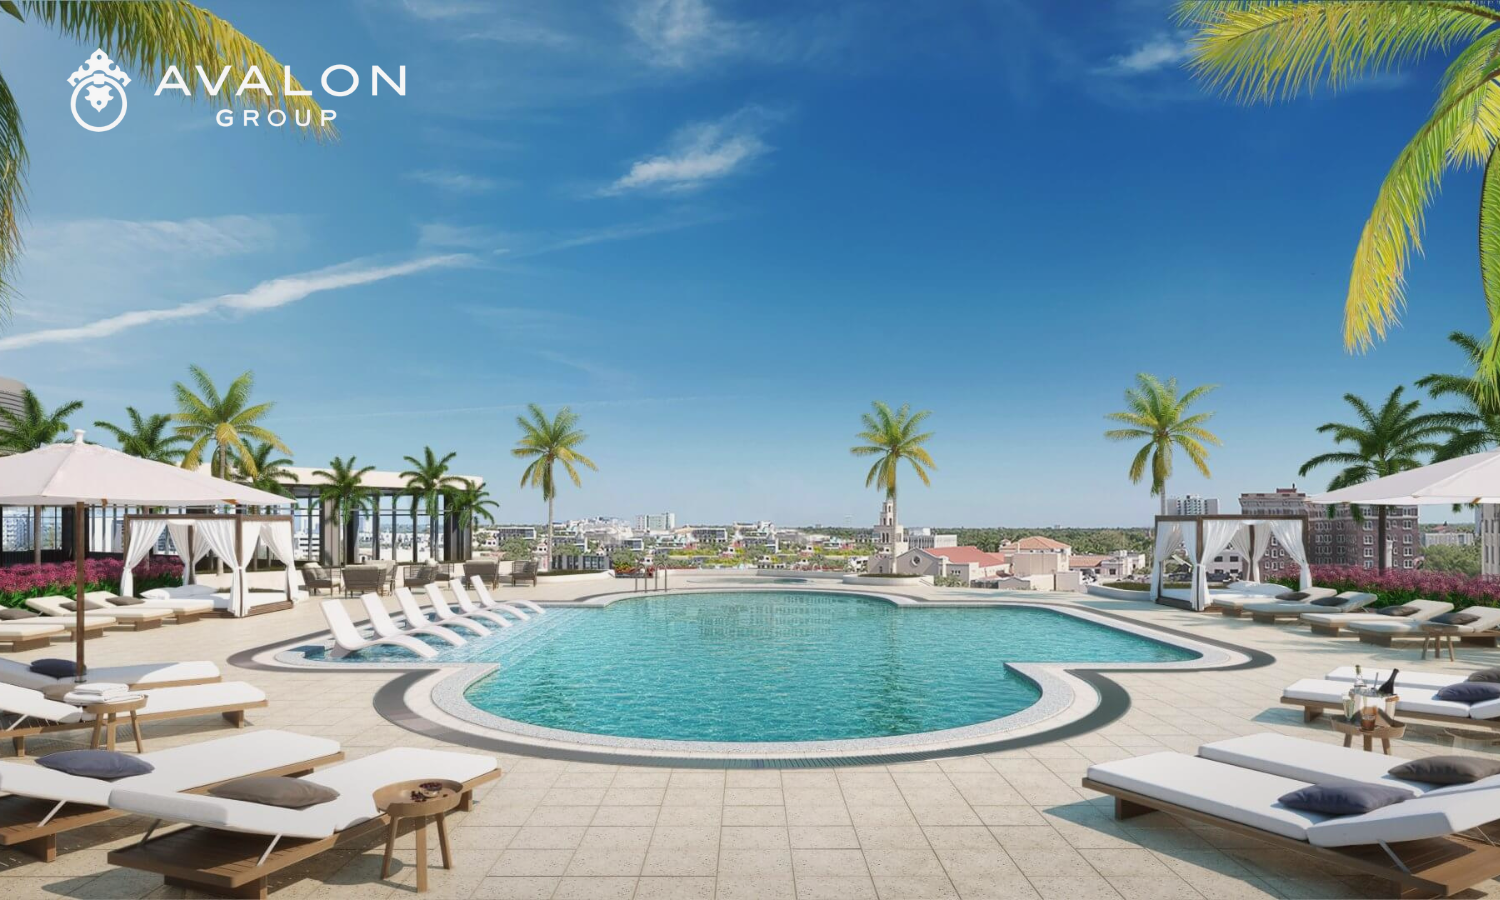 Residences at 400 Central Construction picture shows rendering of Rooftop pool and garden area with cabanas.